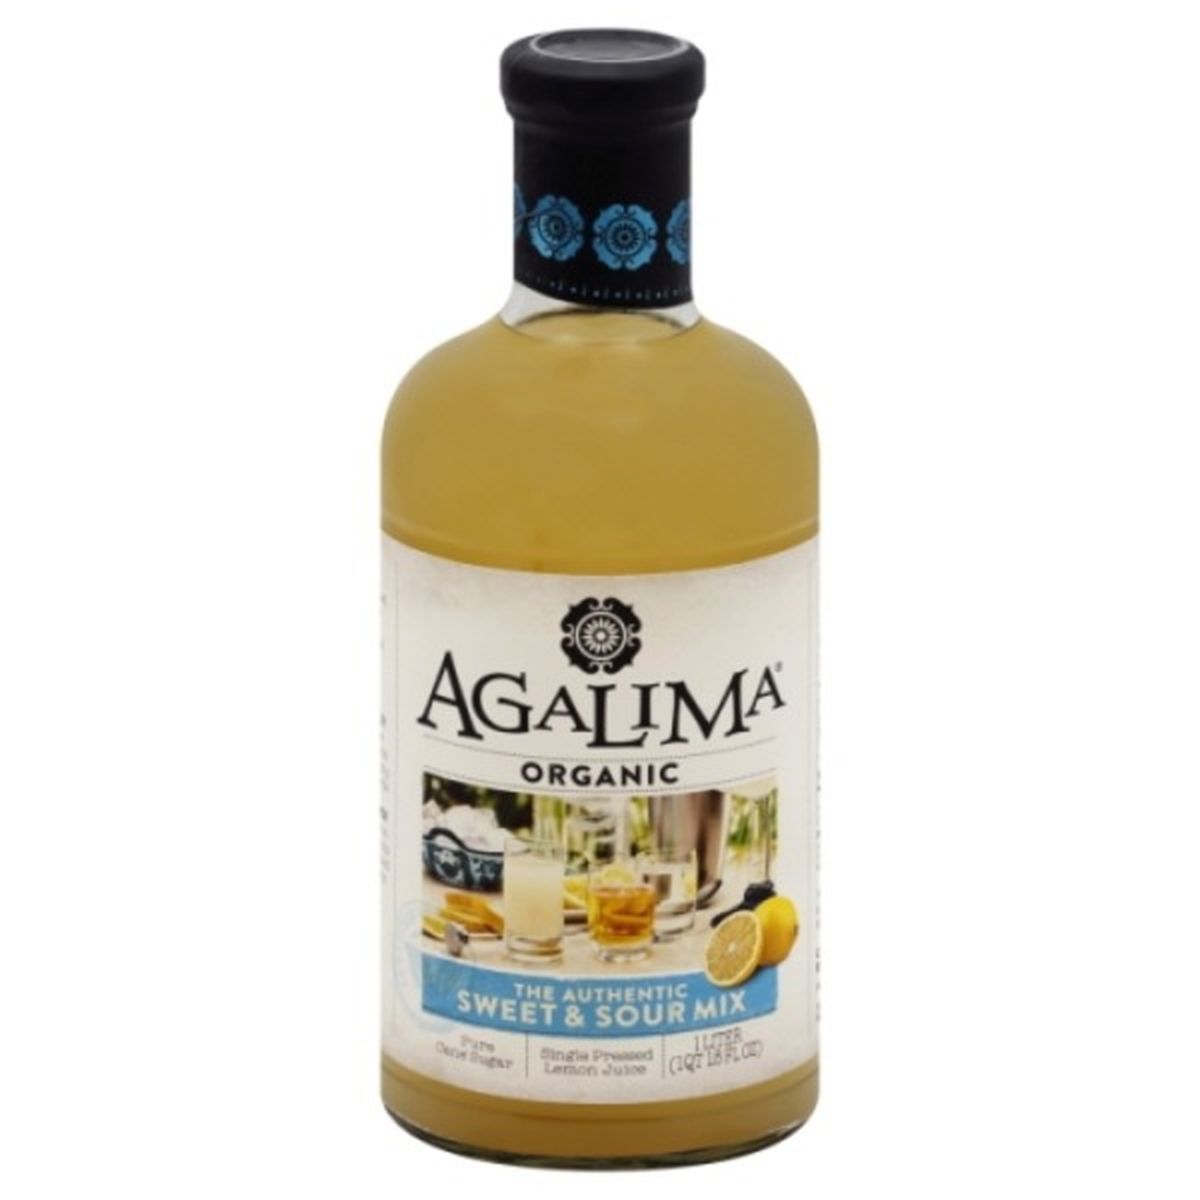 Calories in Agalima Sweet & Sour Mix, Organic, The Authentic